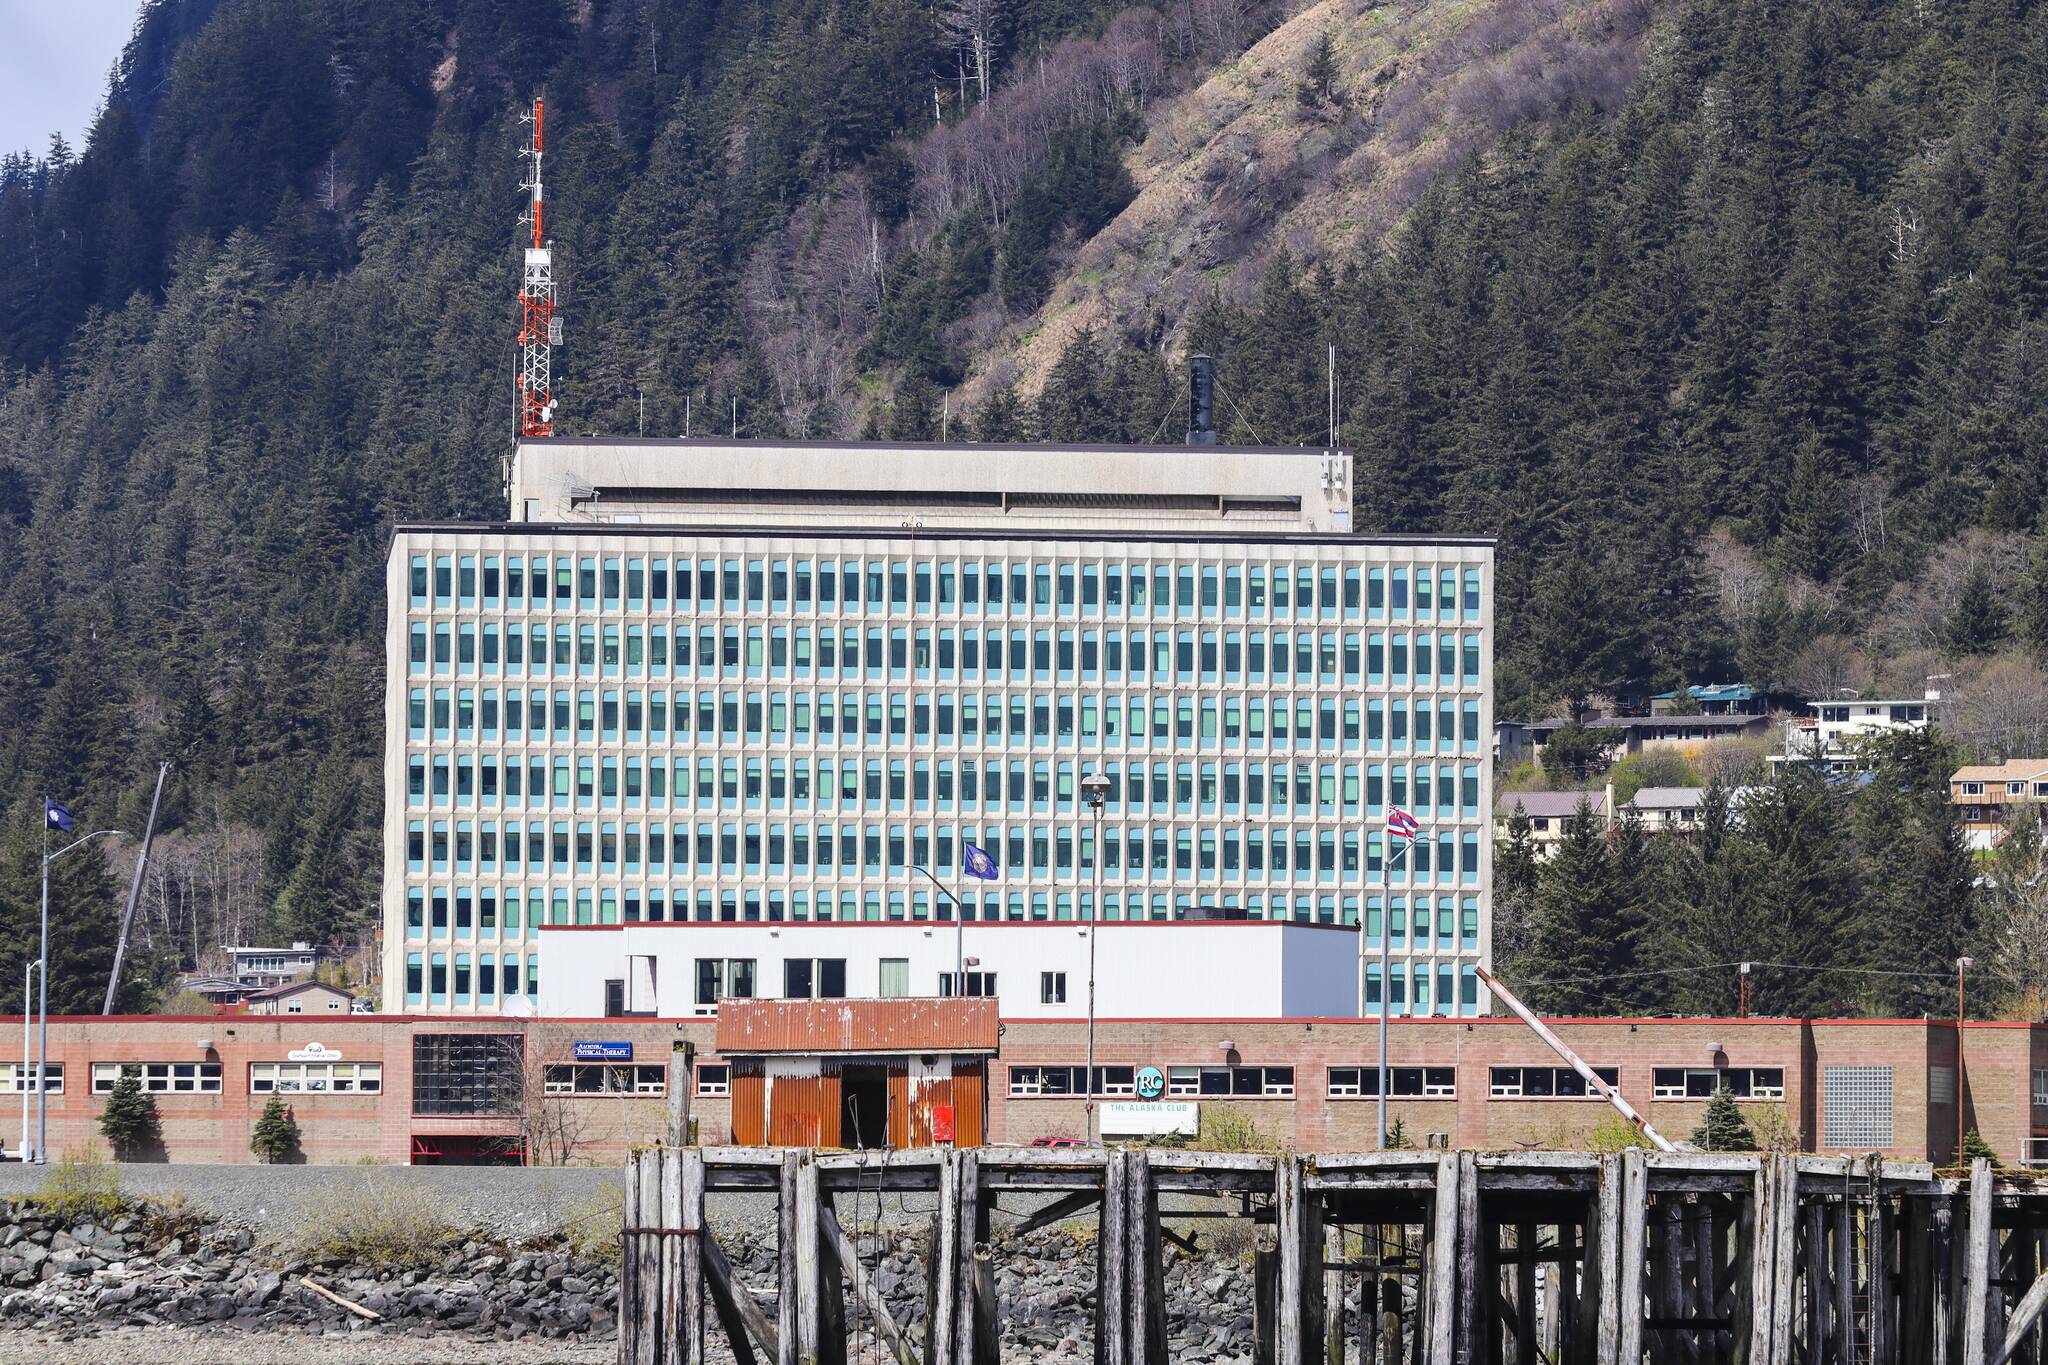 A number of sentencings by a U.S. District Court judge were announced on Thursday for several unrelated arrests that had occurred over the last several years. (Michael S. Lockett / Juneau Empire)